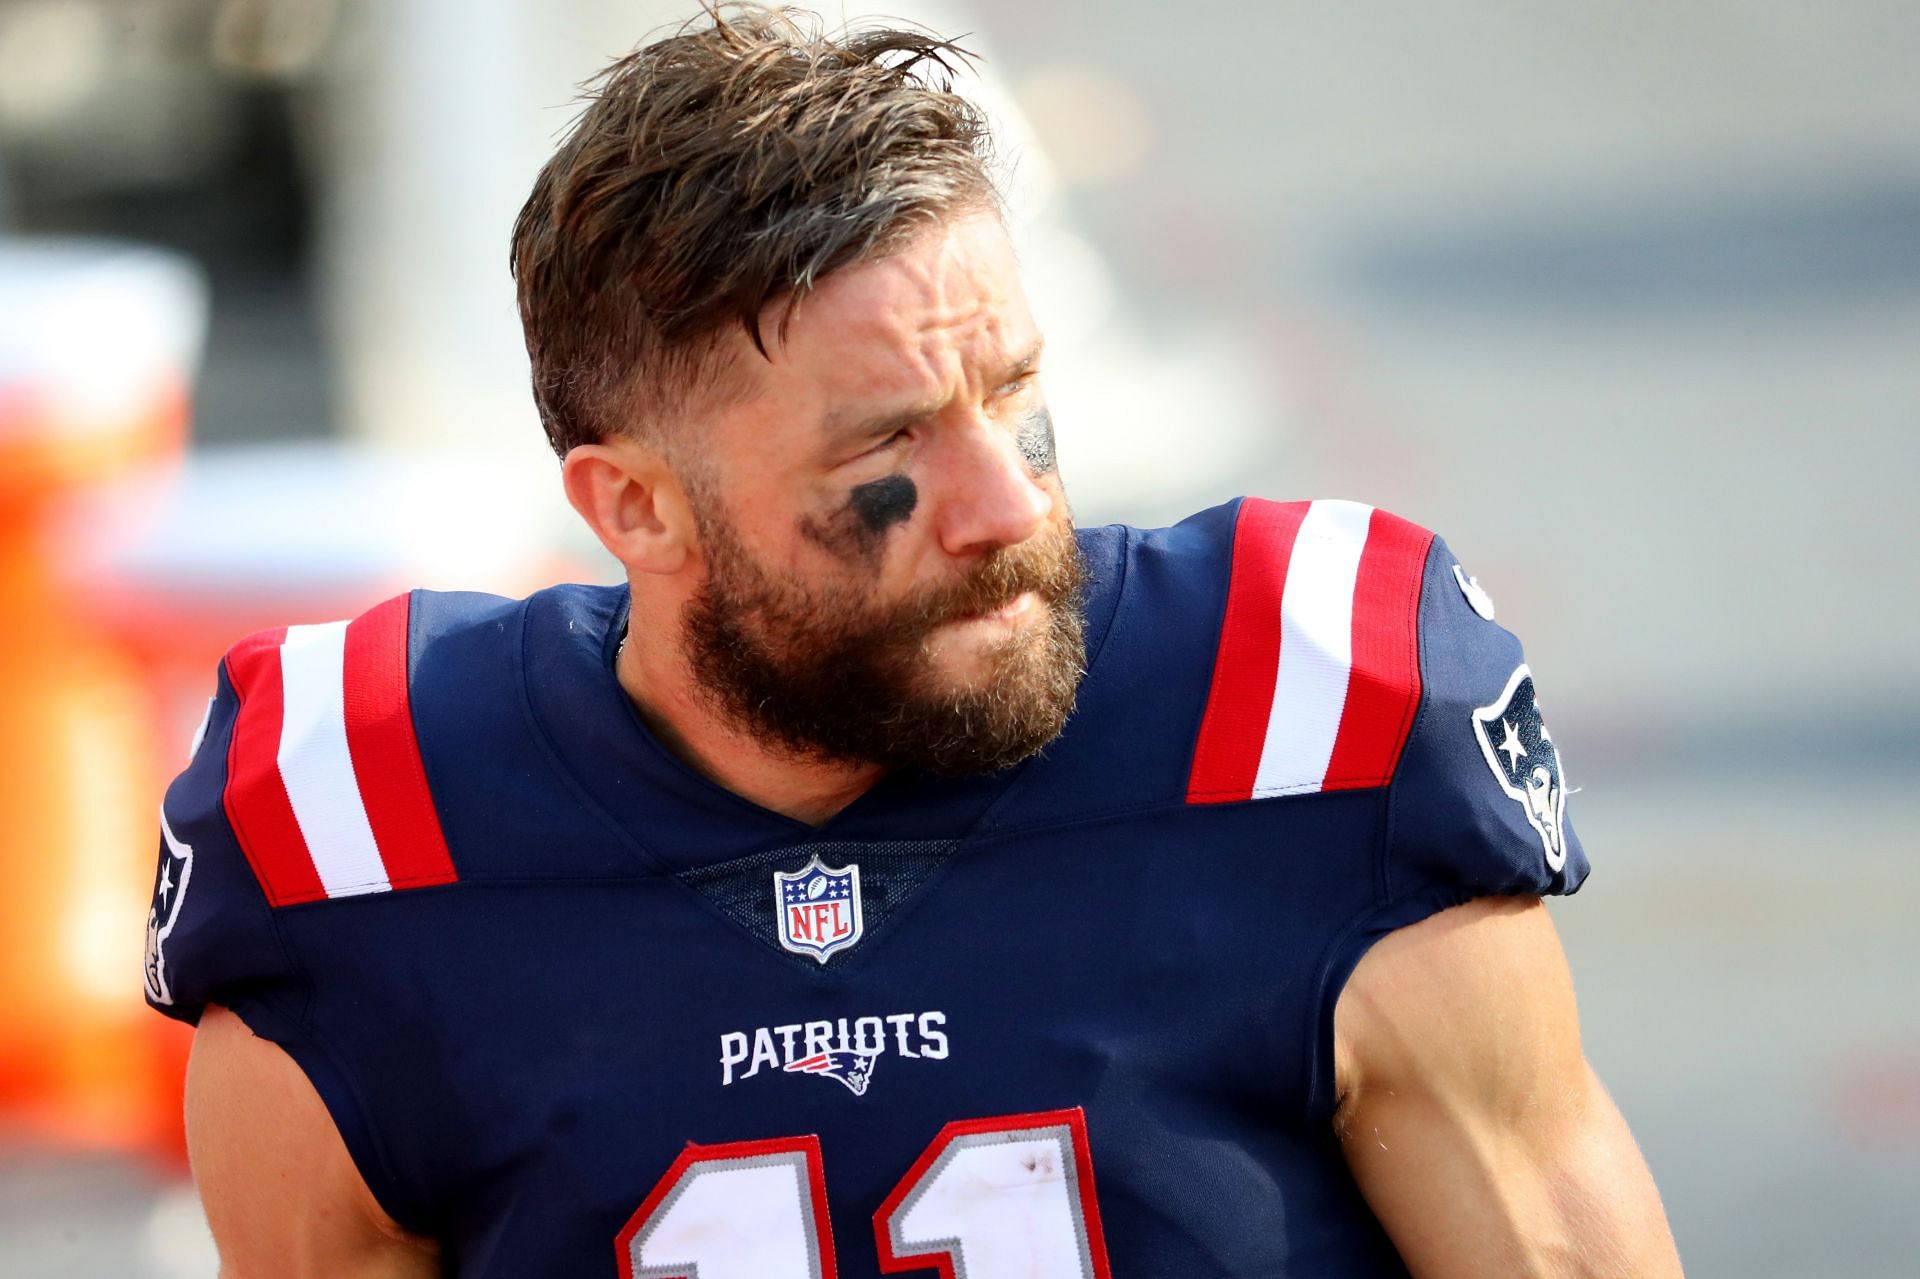 Edelman was a Patriots great from the 2010s.